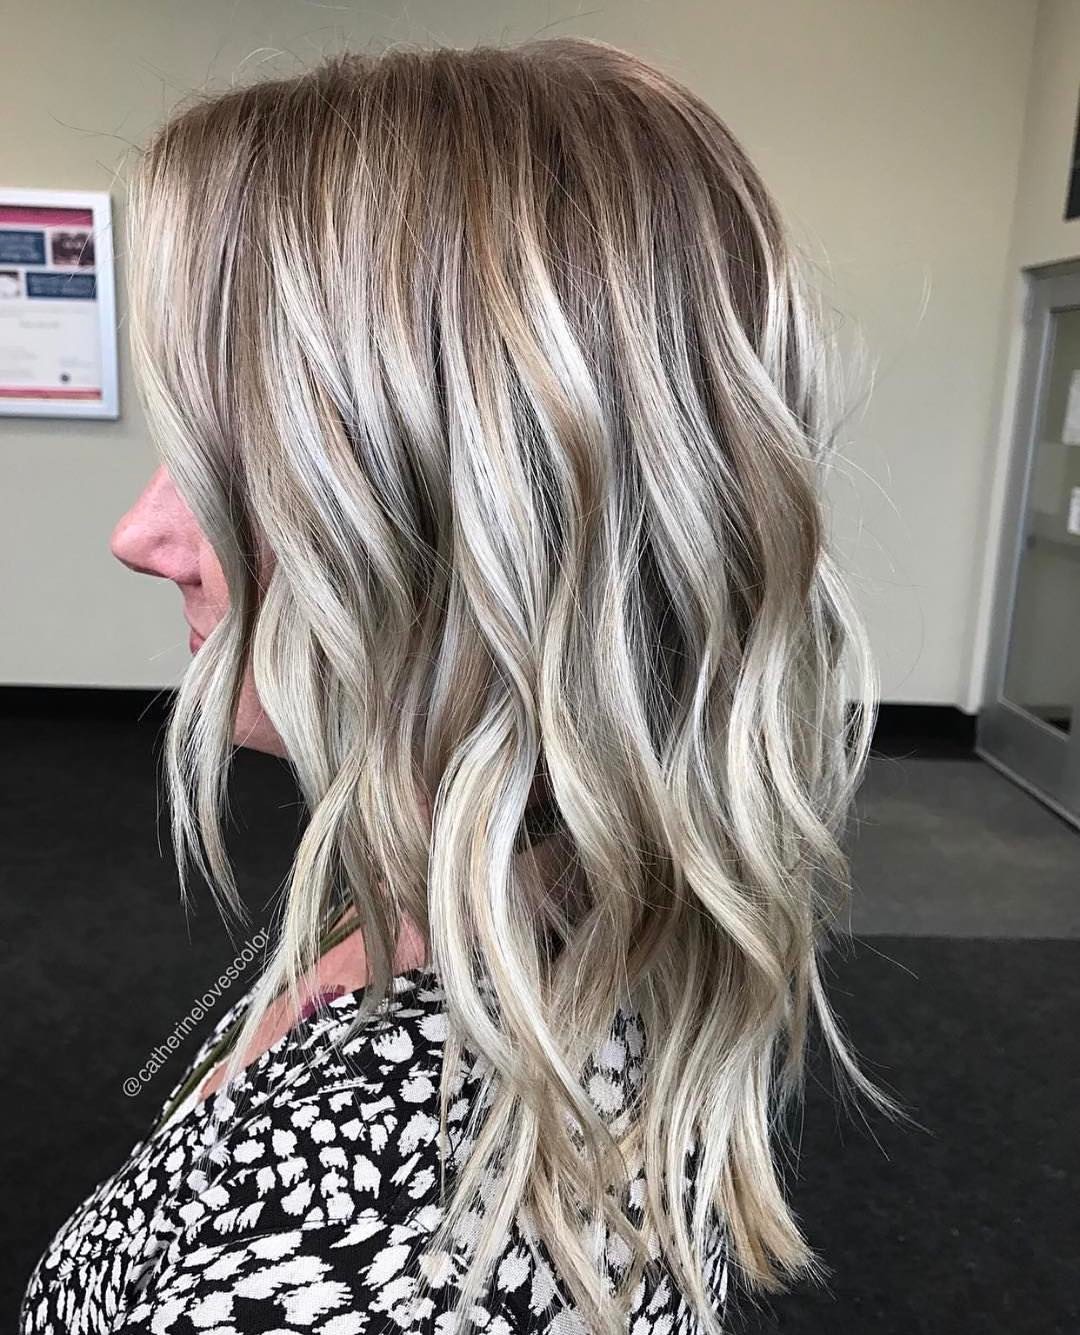 20 Adorable Ash Blonde Hairstyles To Try Hair Color Ideas 2020